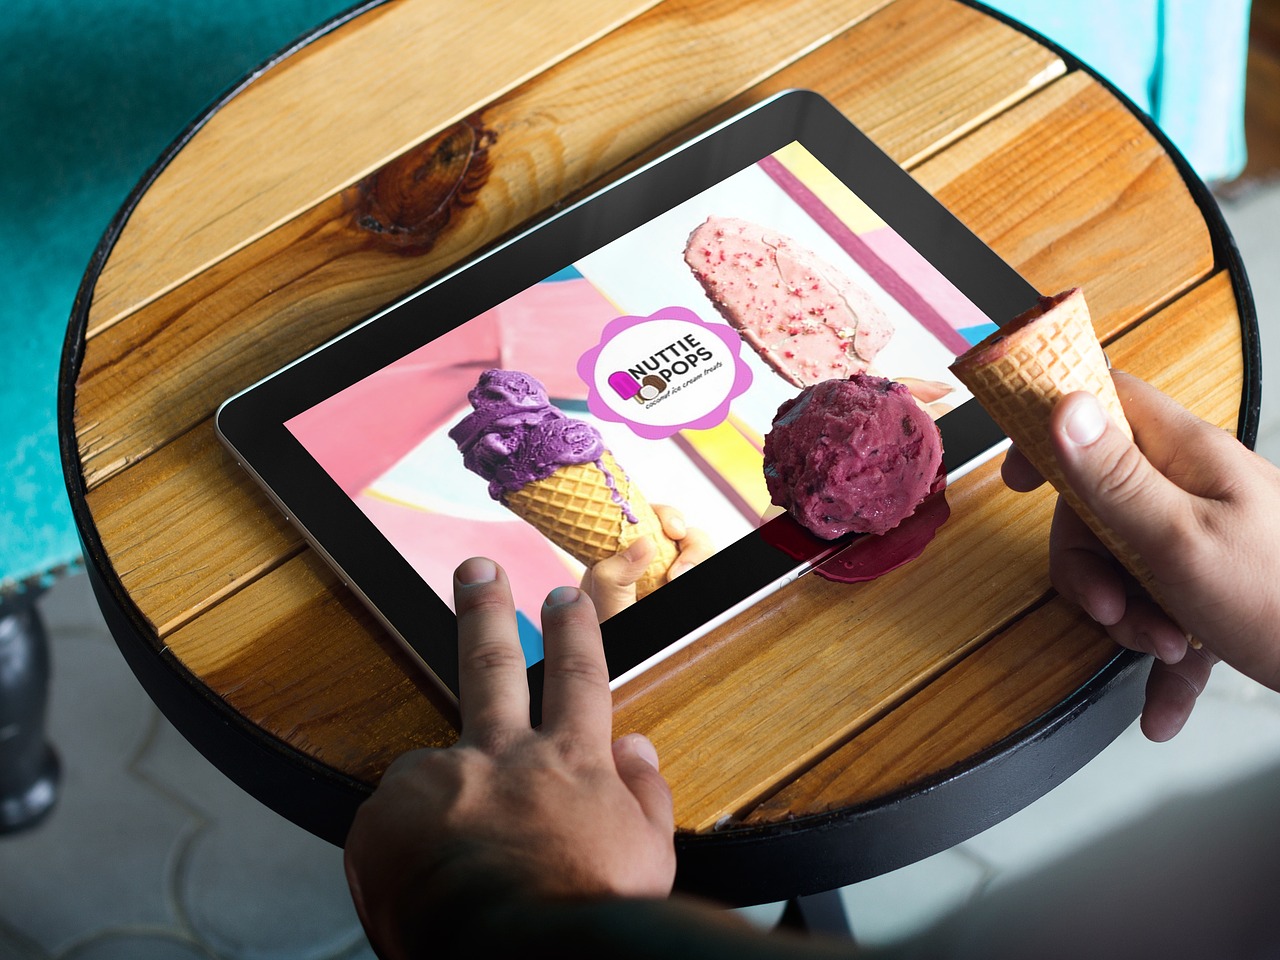 Five Simple Marketing and Promotion Tips to help during COVID-19 - A tablet user drops their ice cream onto a digital advertisement for the ice cream